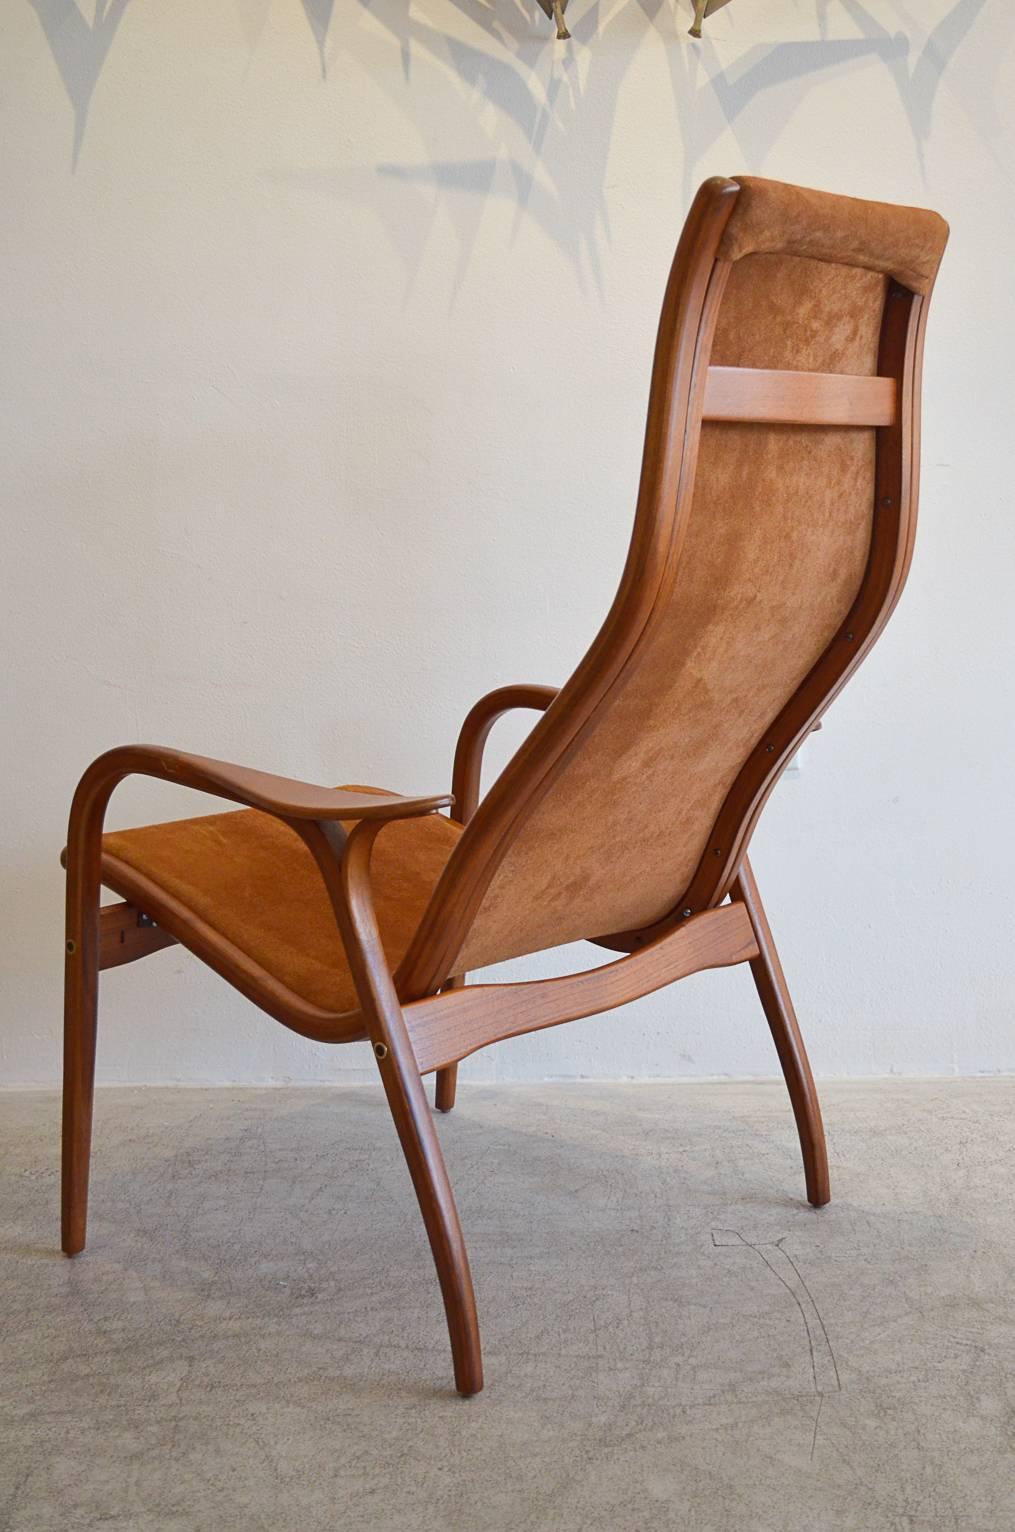 Elegant Yngve Ekstrom Lamino chair with new suede upholstery and refinished wood. Pristine showroom condition, early model with brass detailed hardware. Elegantly done in beautiful carmel suede.

Measures: 27.5